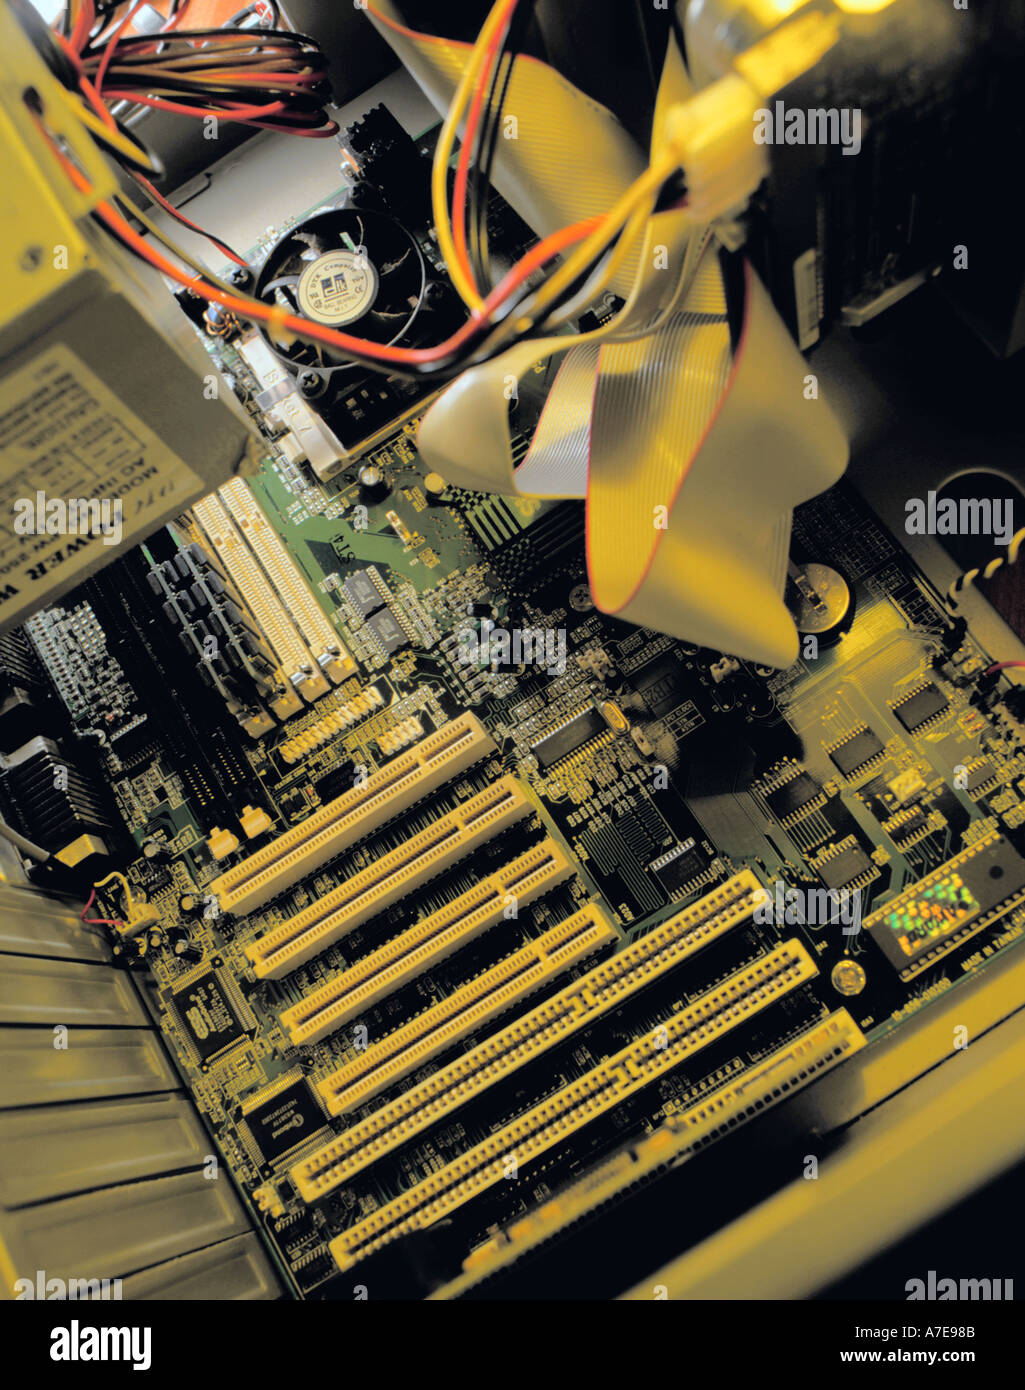 Inside a personal computer, showing mother board with SCSI connections for  outlet ports at the base of the picture Stock Photo - Alamy